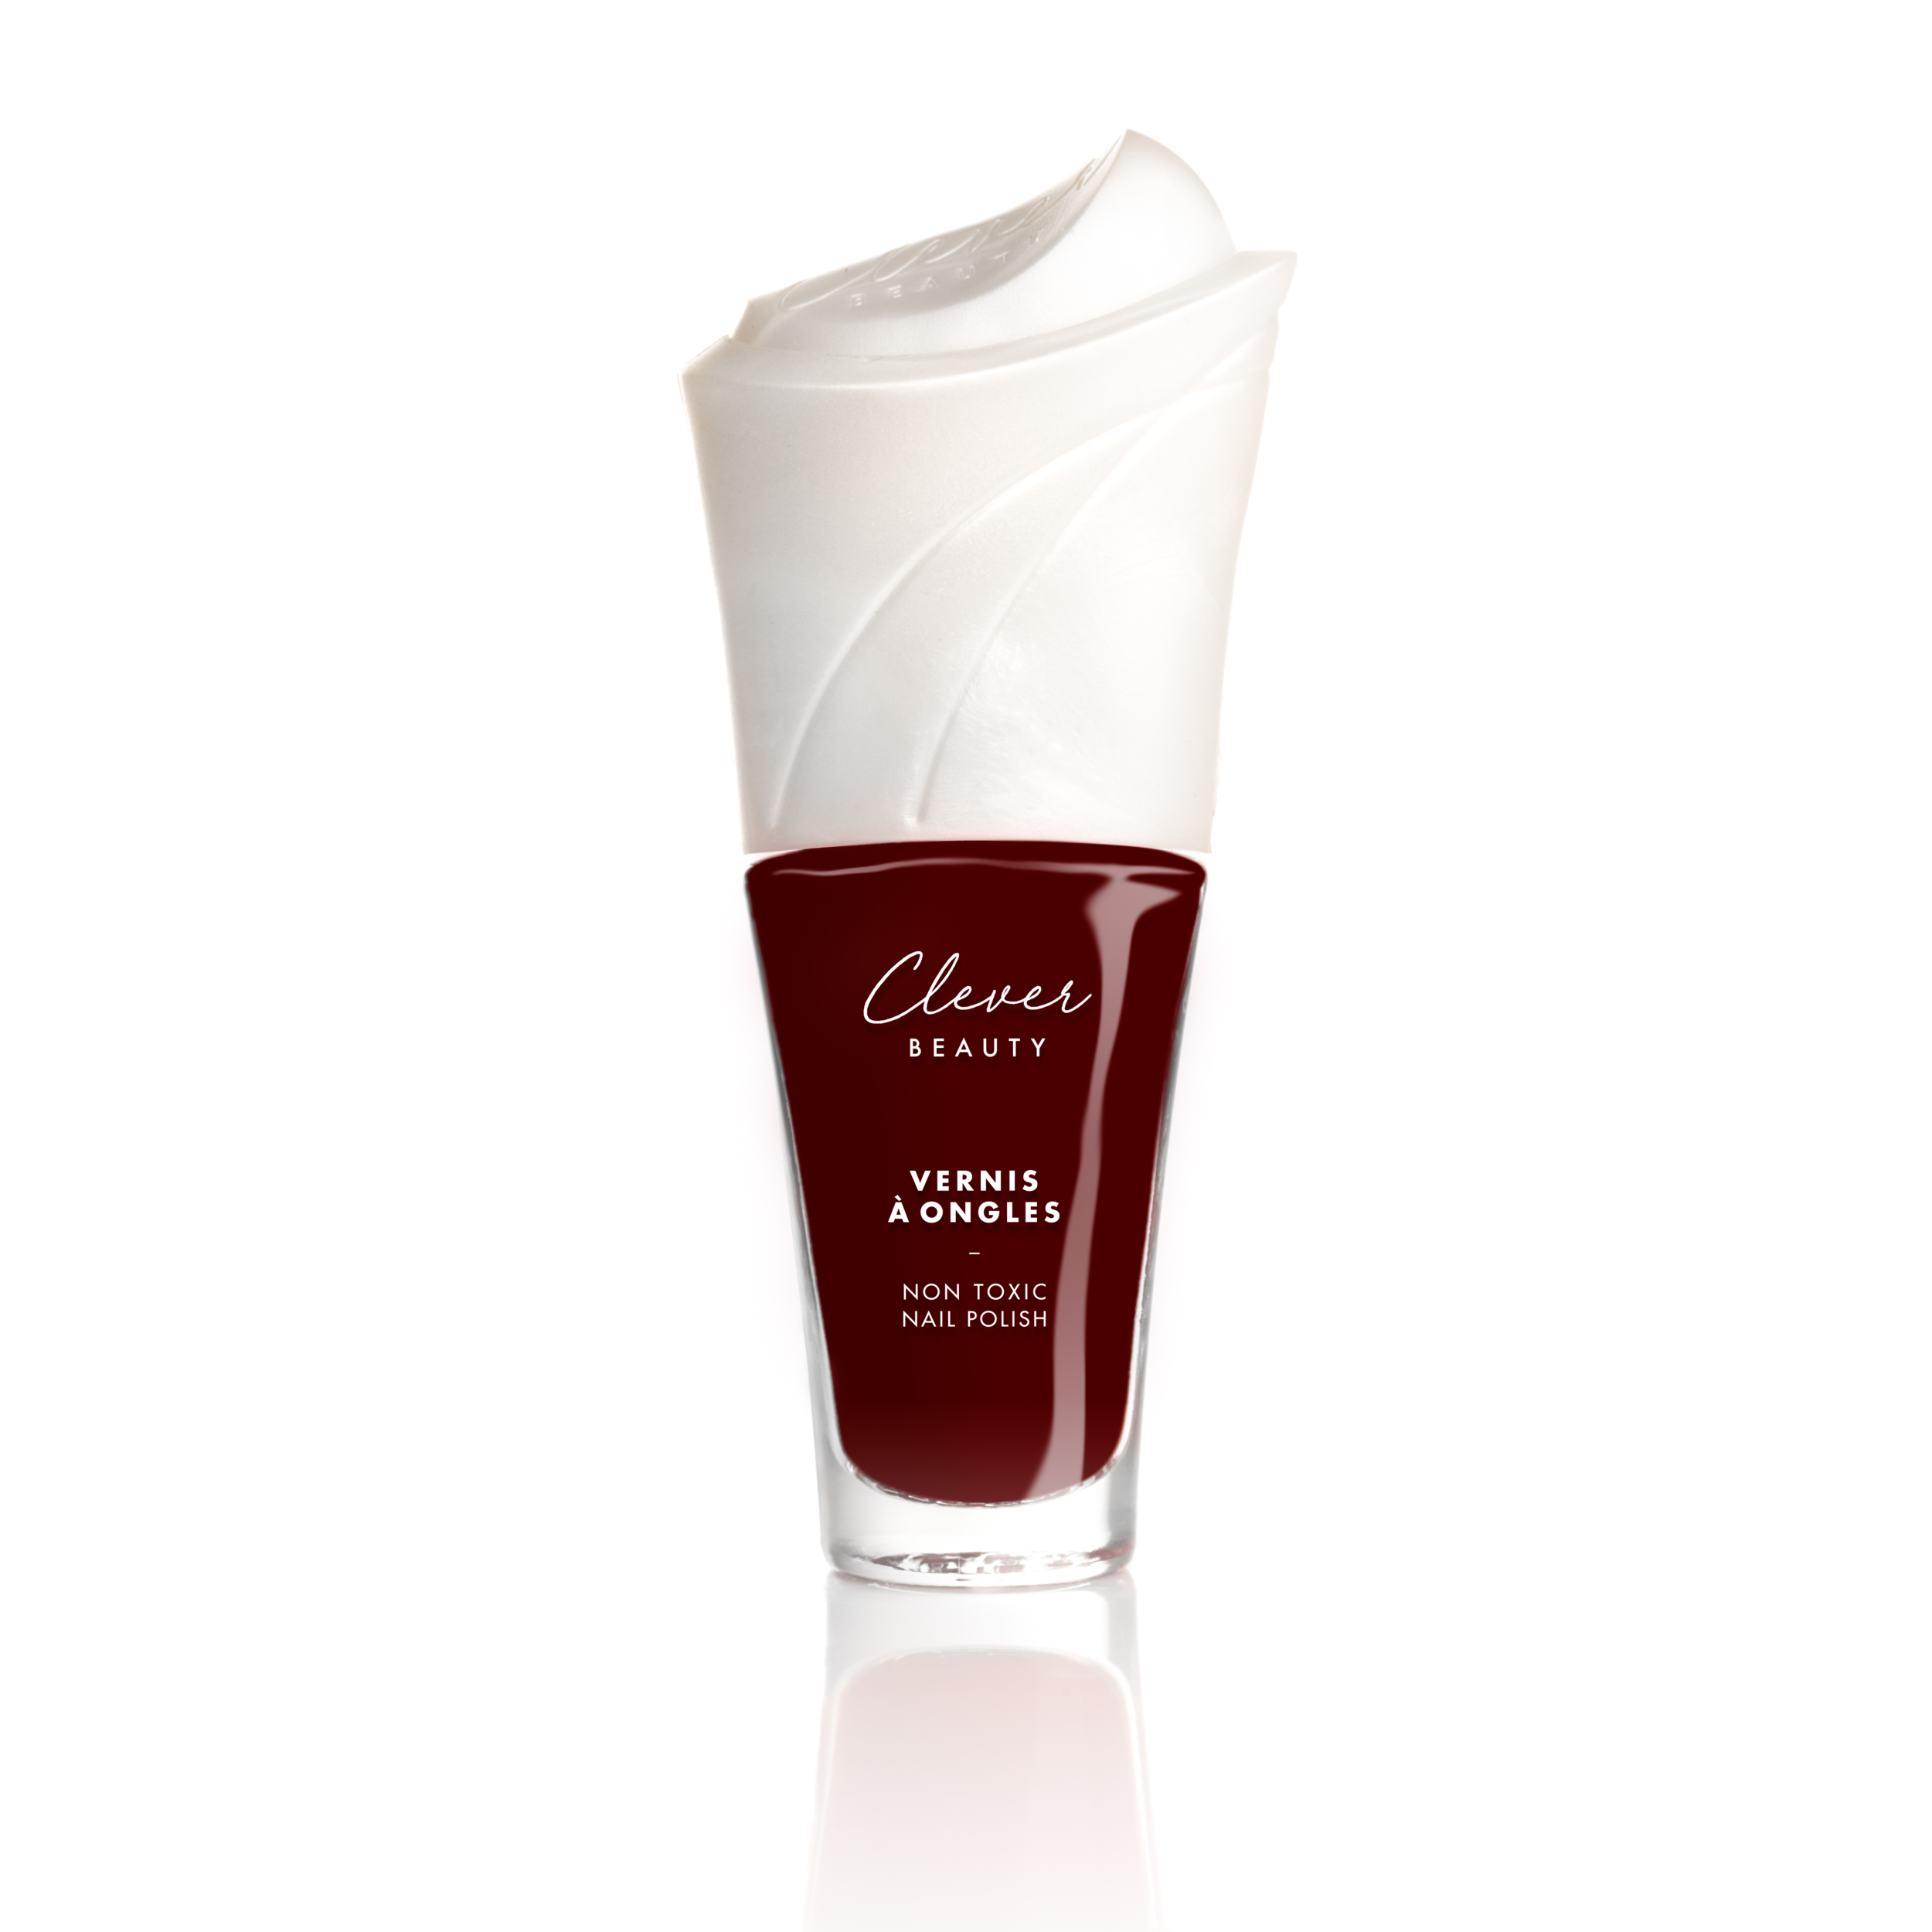 Clever Beauty- vernis anti-gaspillage-mysterieuse-1